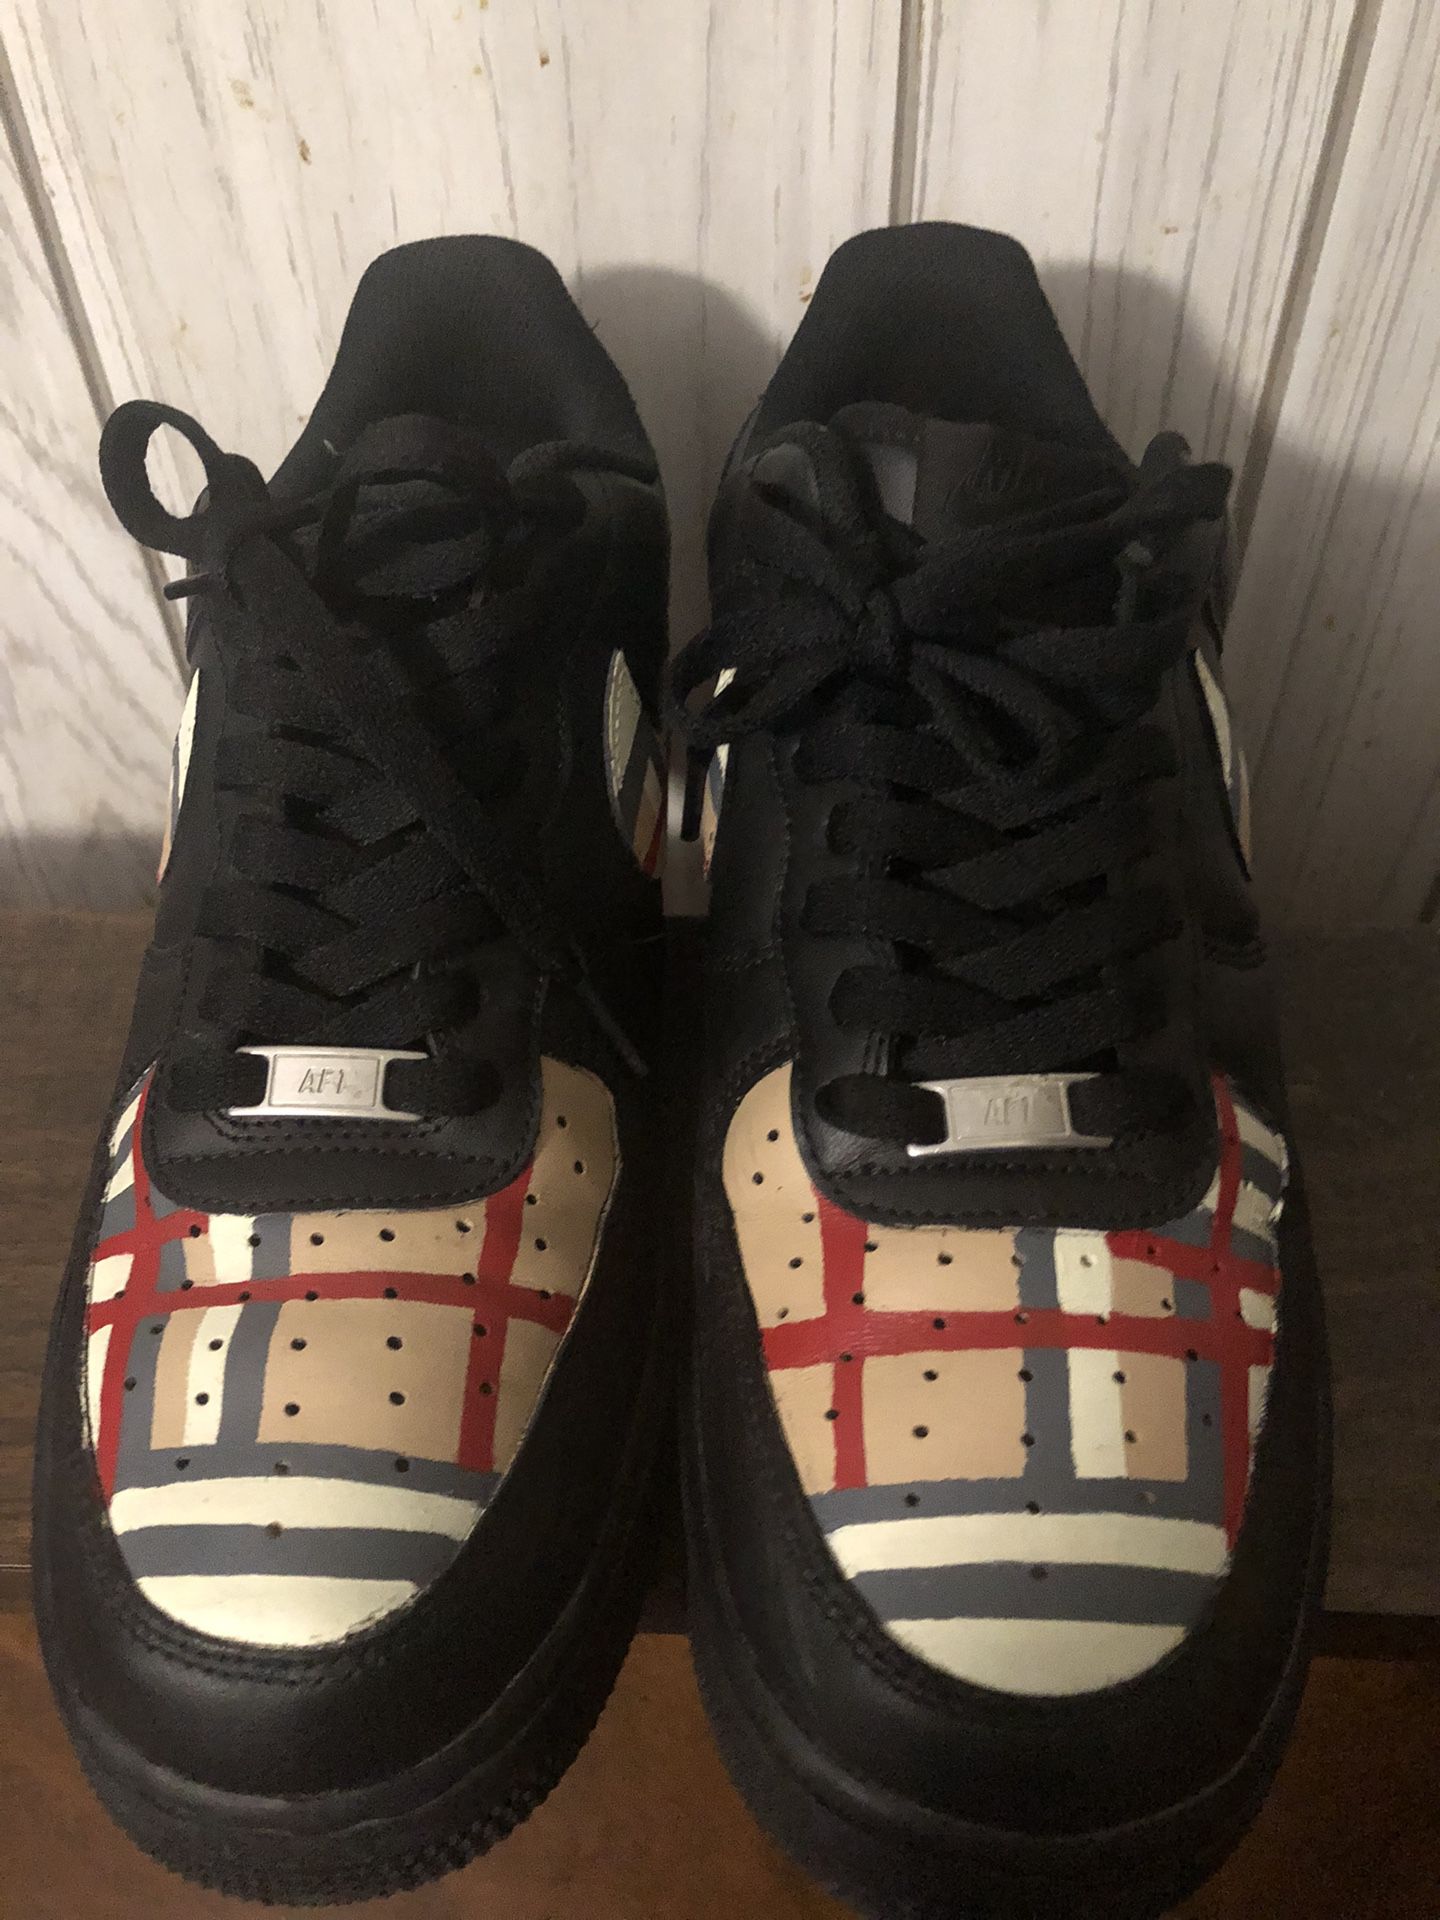 Black Airforce Burberry 